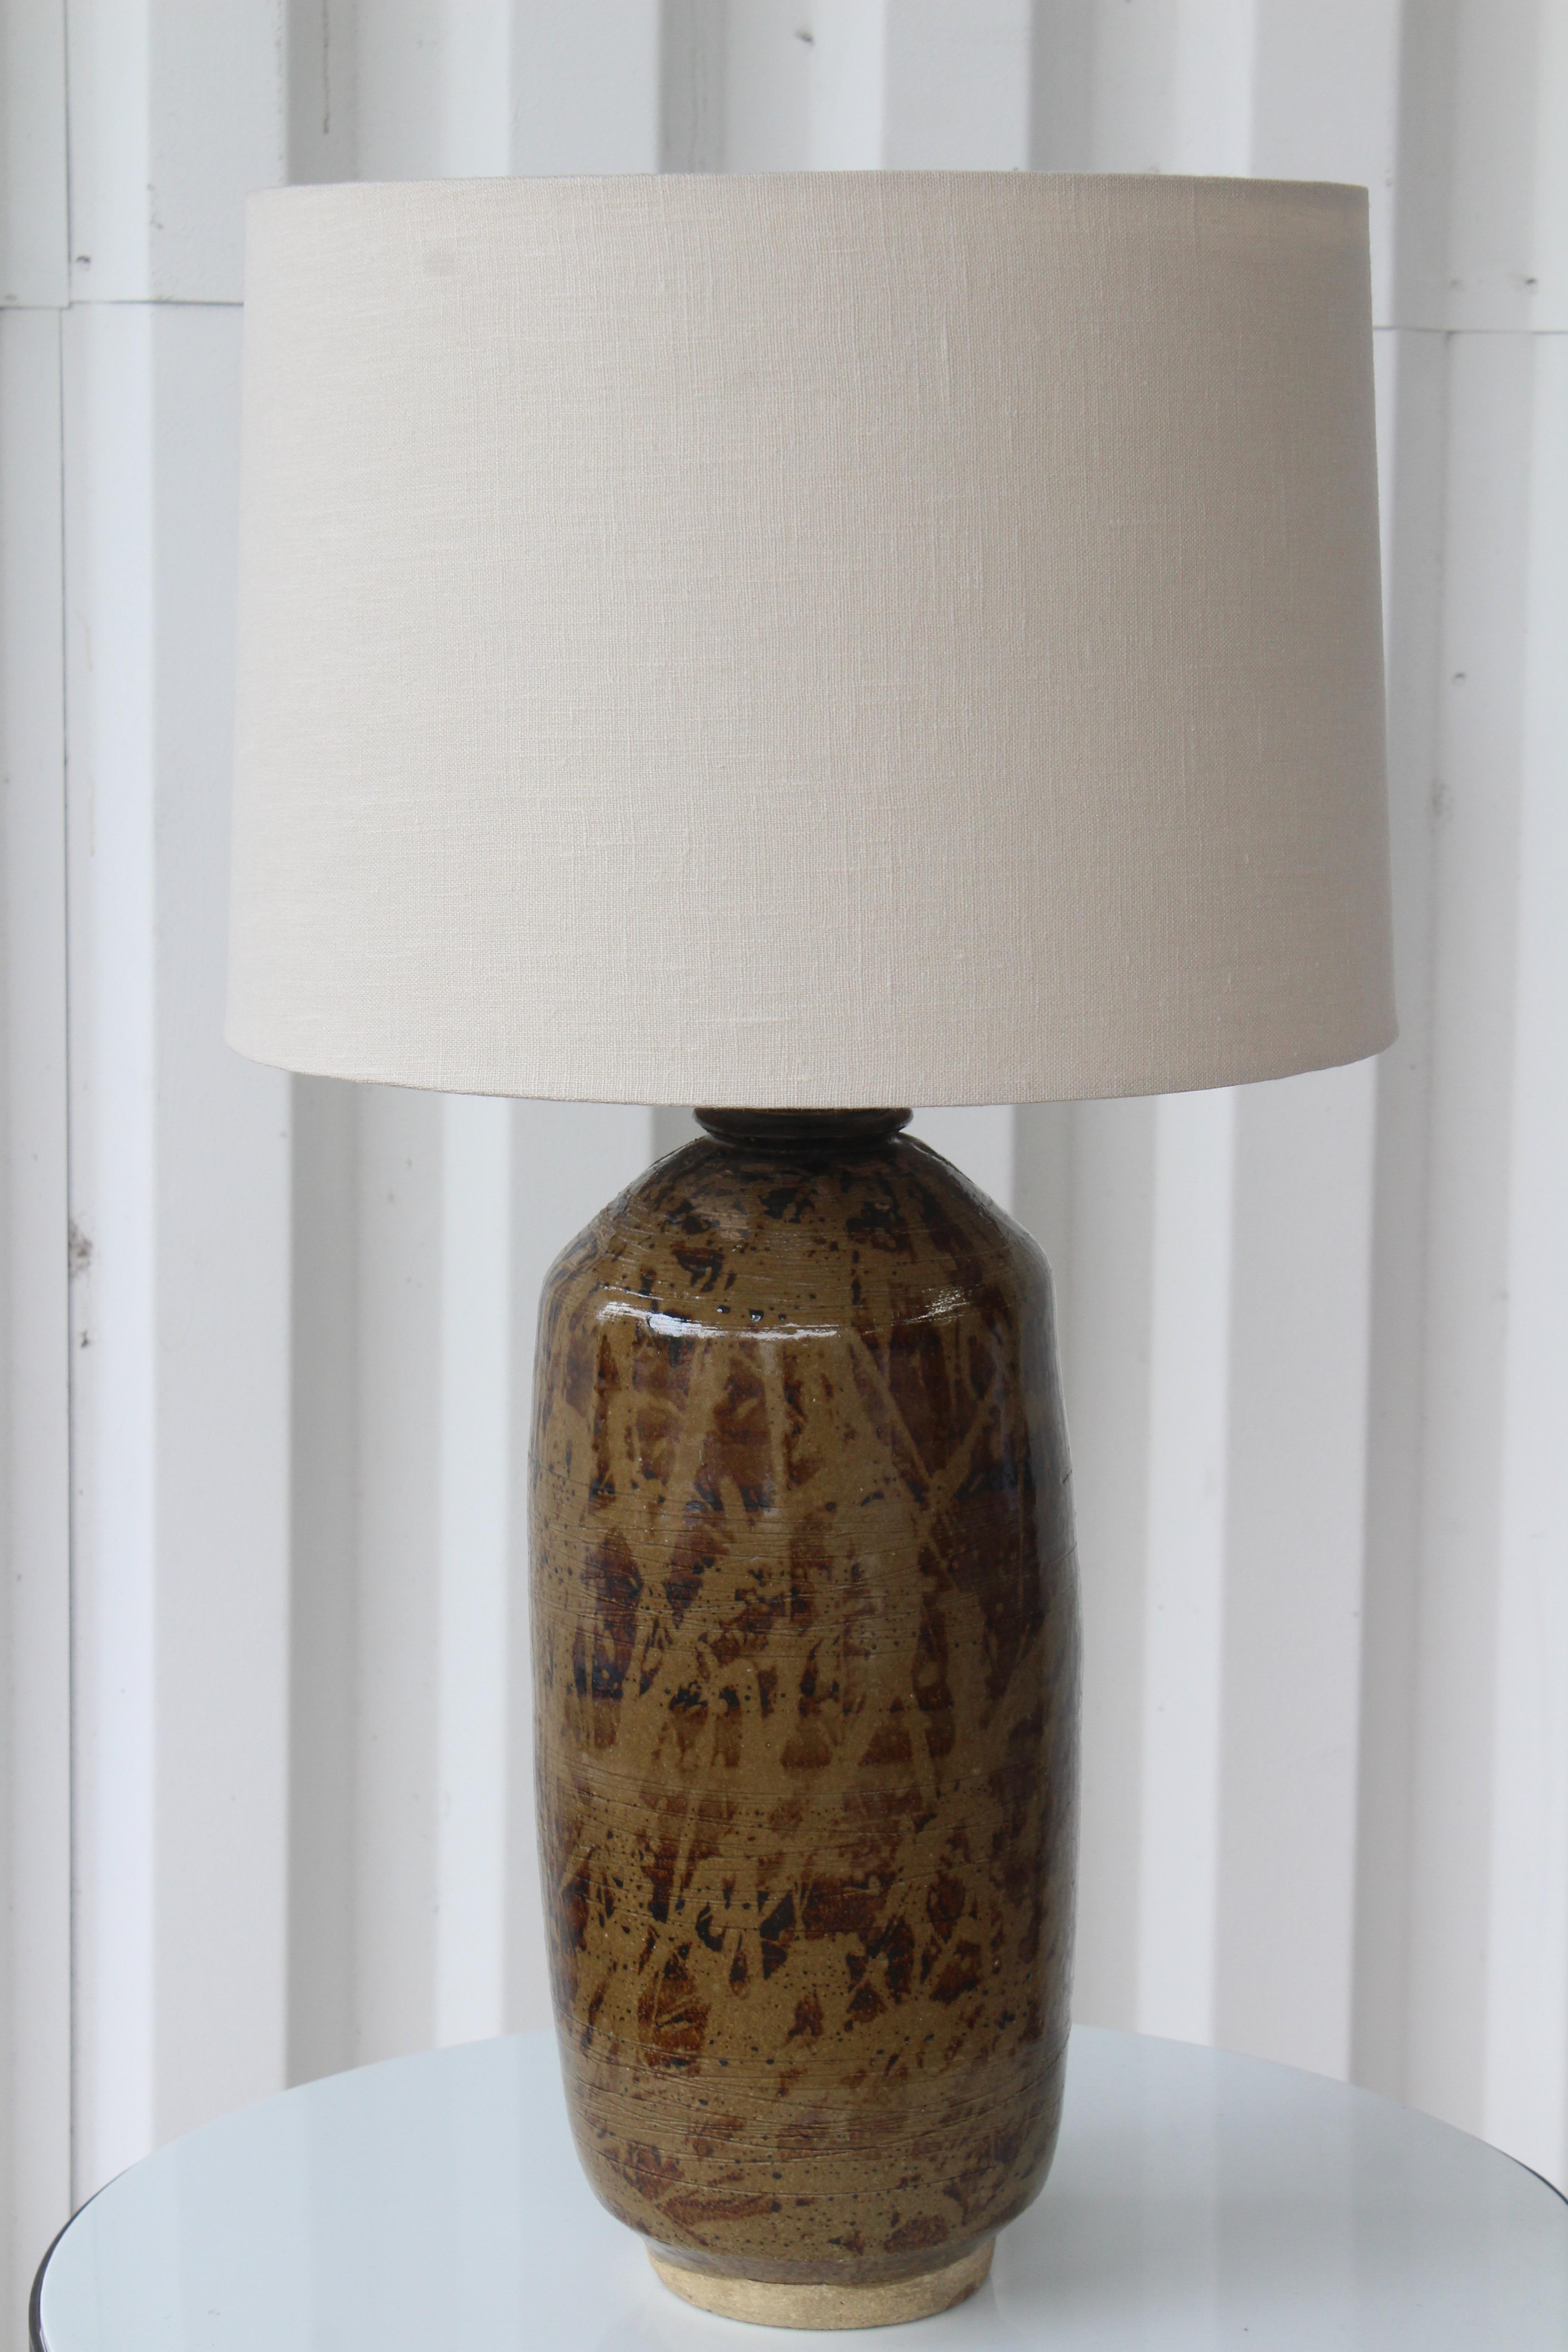 Vintage 1960s studio ceramic pottery lamp. Newly rewired and fitted with a new custom made shade in Belgian linen. 26